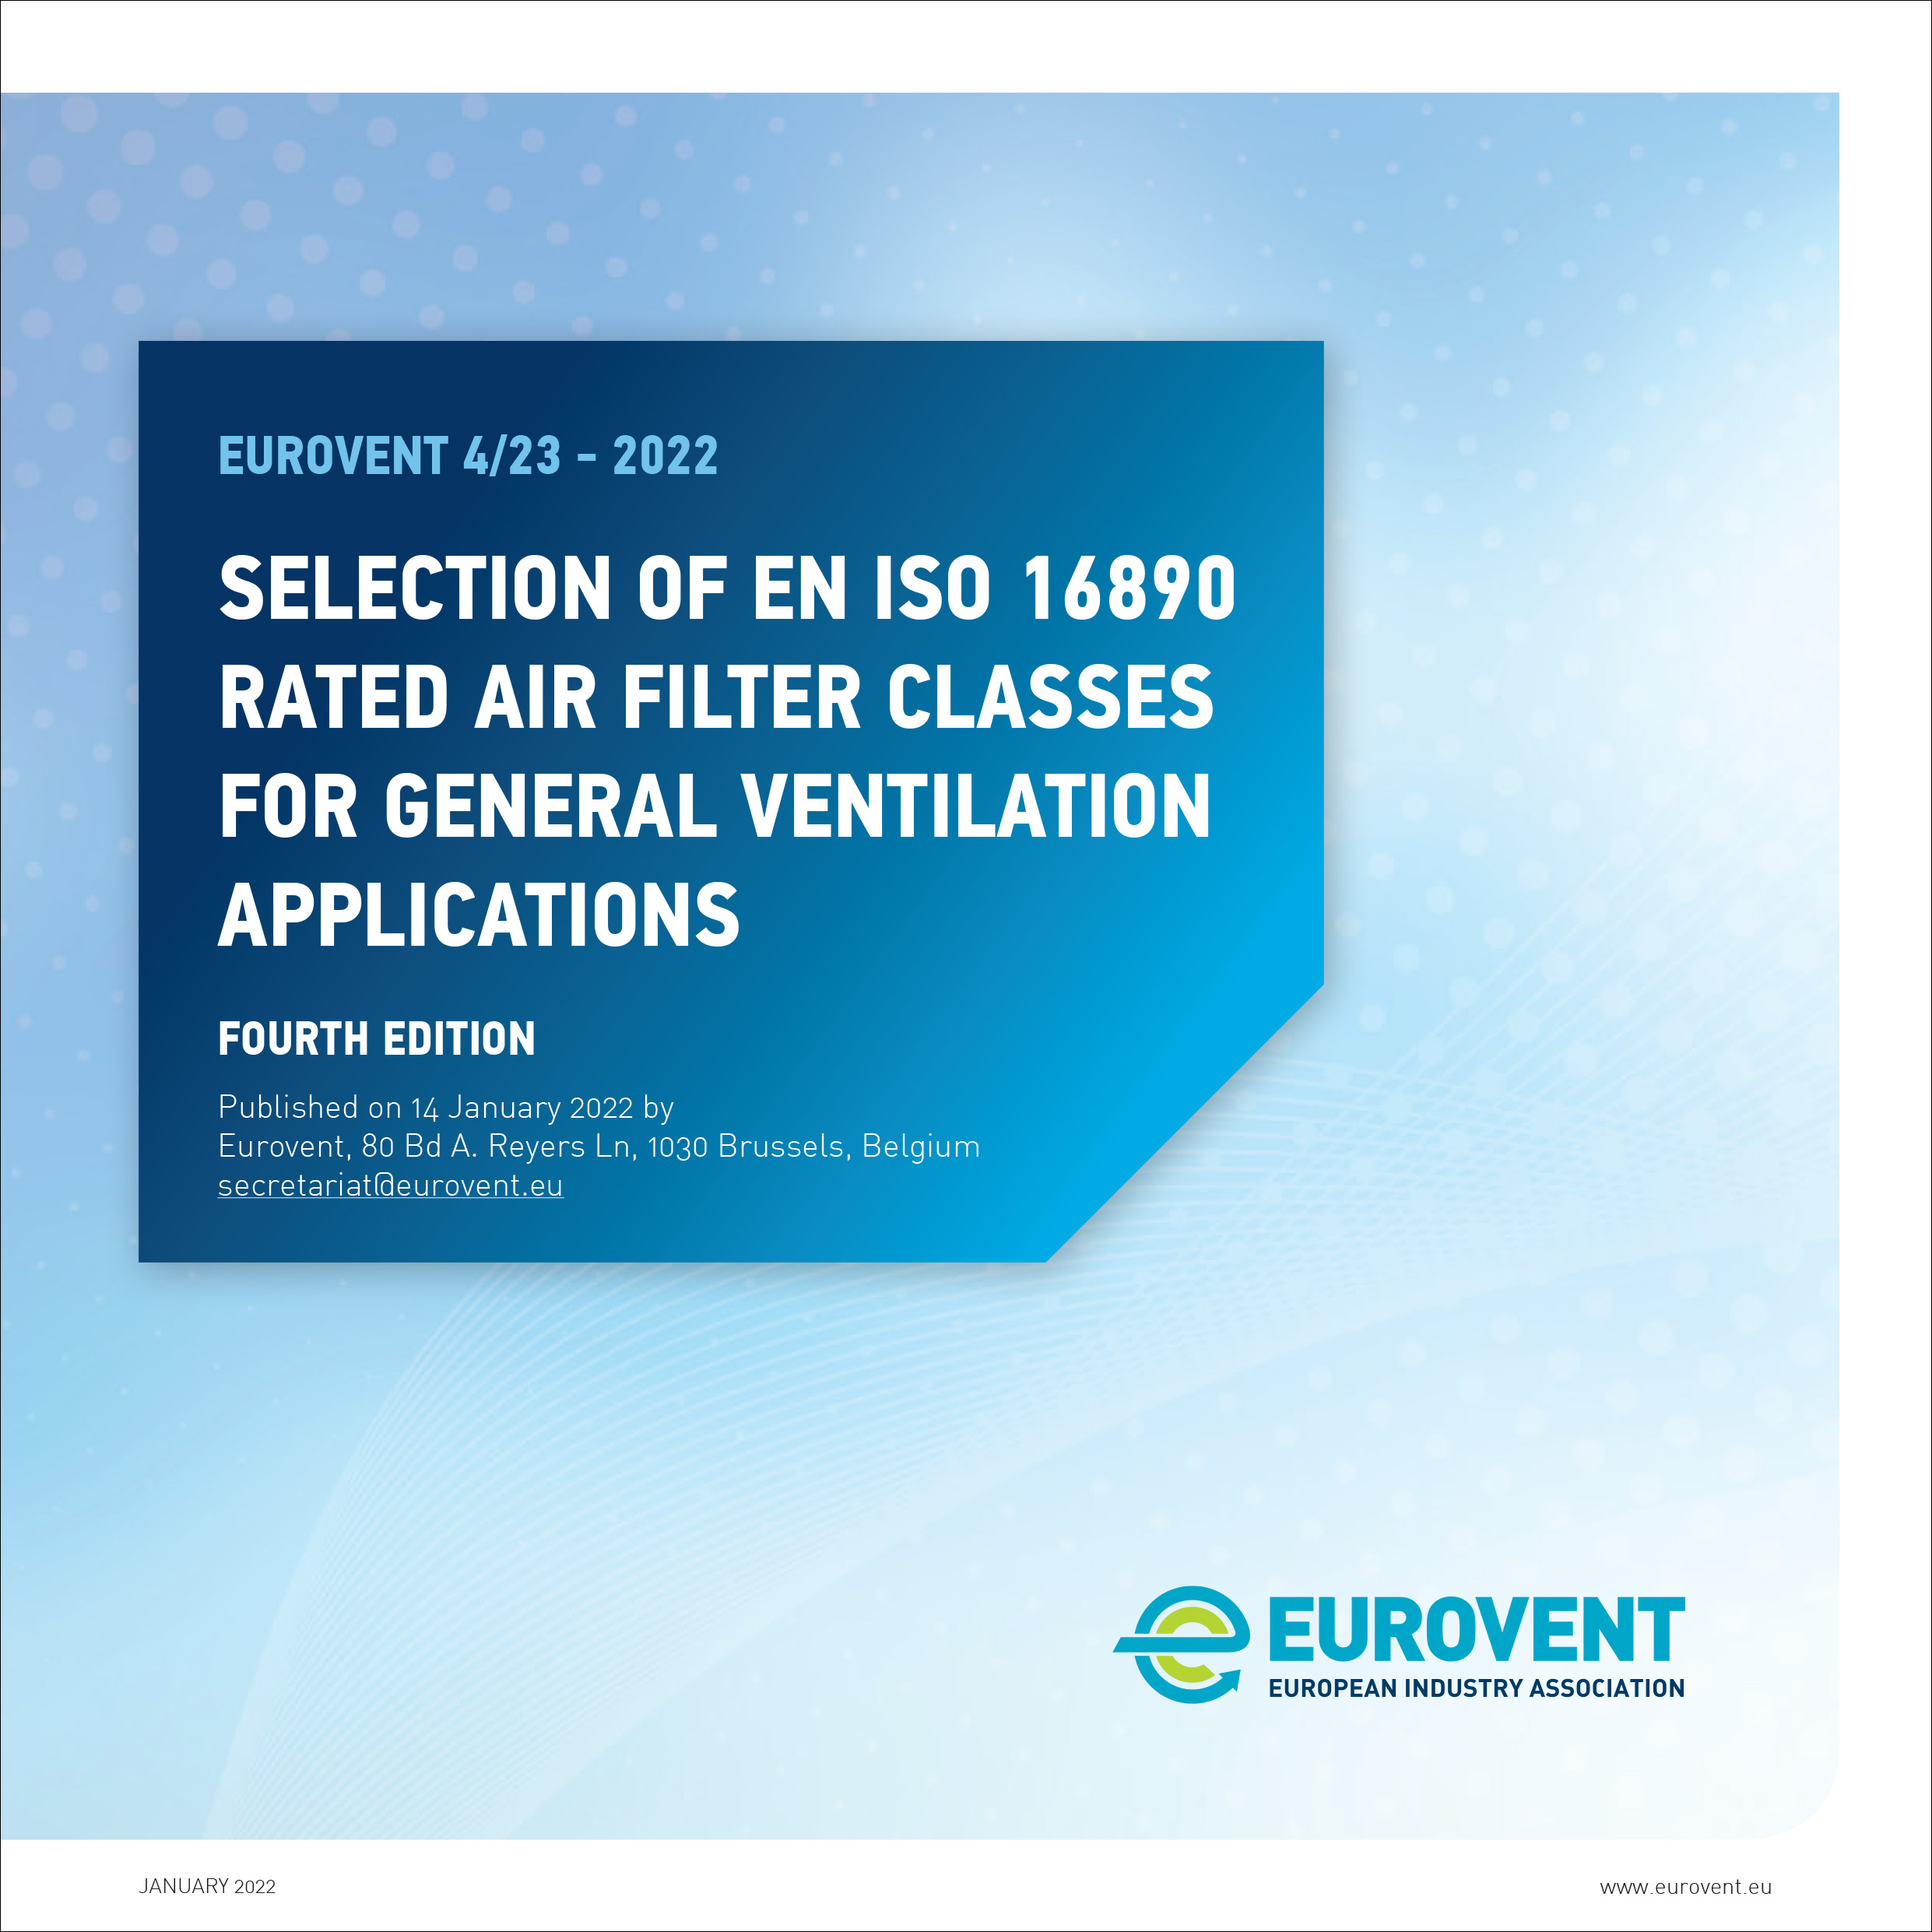 Eurovent 4/23 - 2022: Selection of EN ISO 16890 rated air filter classes - Fourth Edition - English